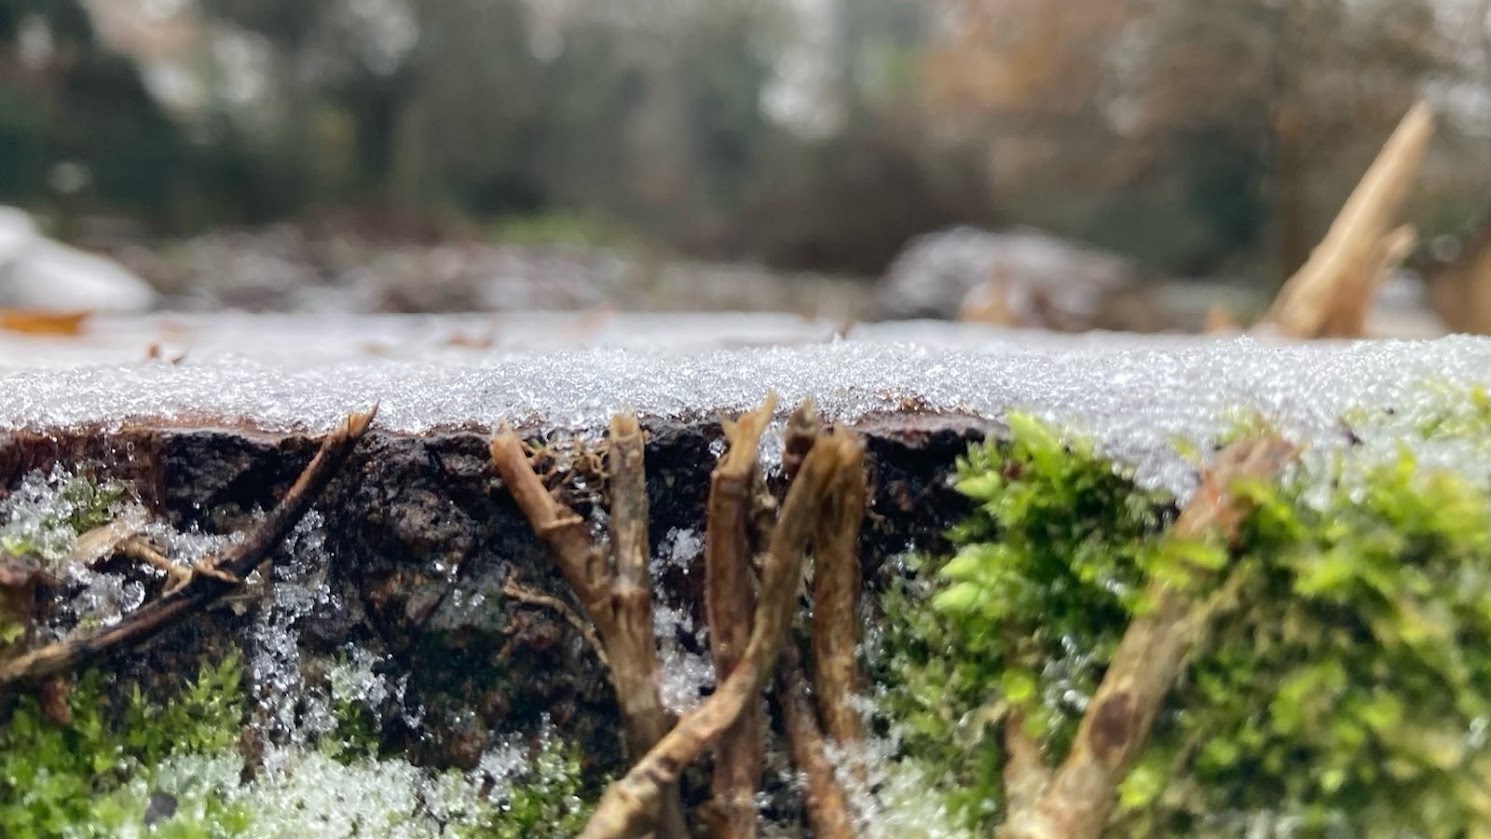 A layer of frost on a large tree stump, moss and severed ivy stems in the foreground, blurred woods in the background.